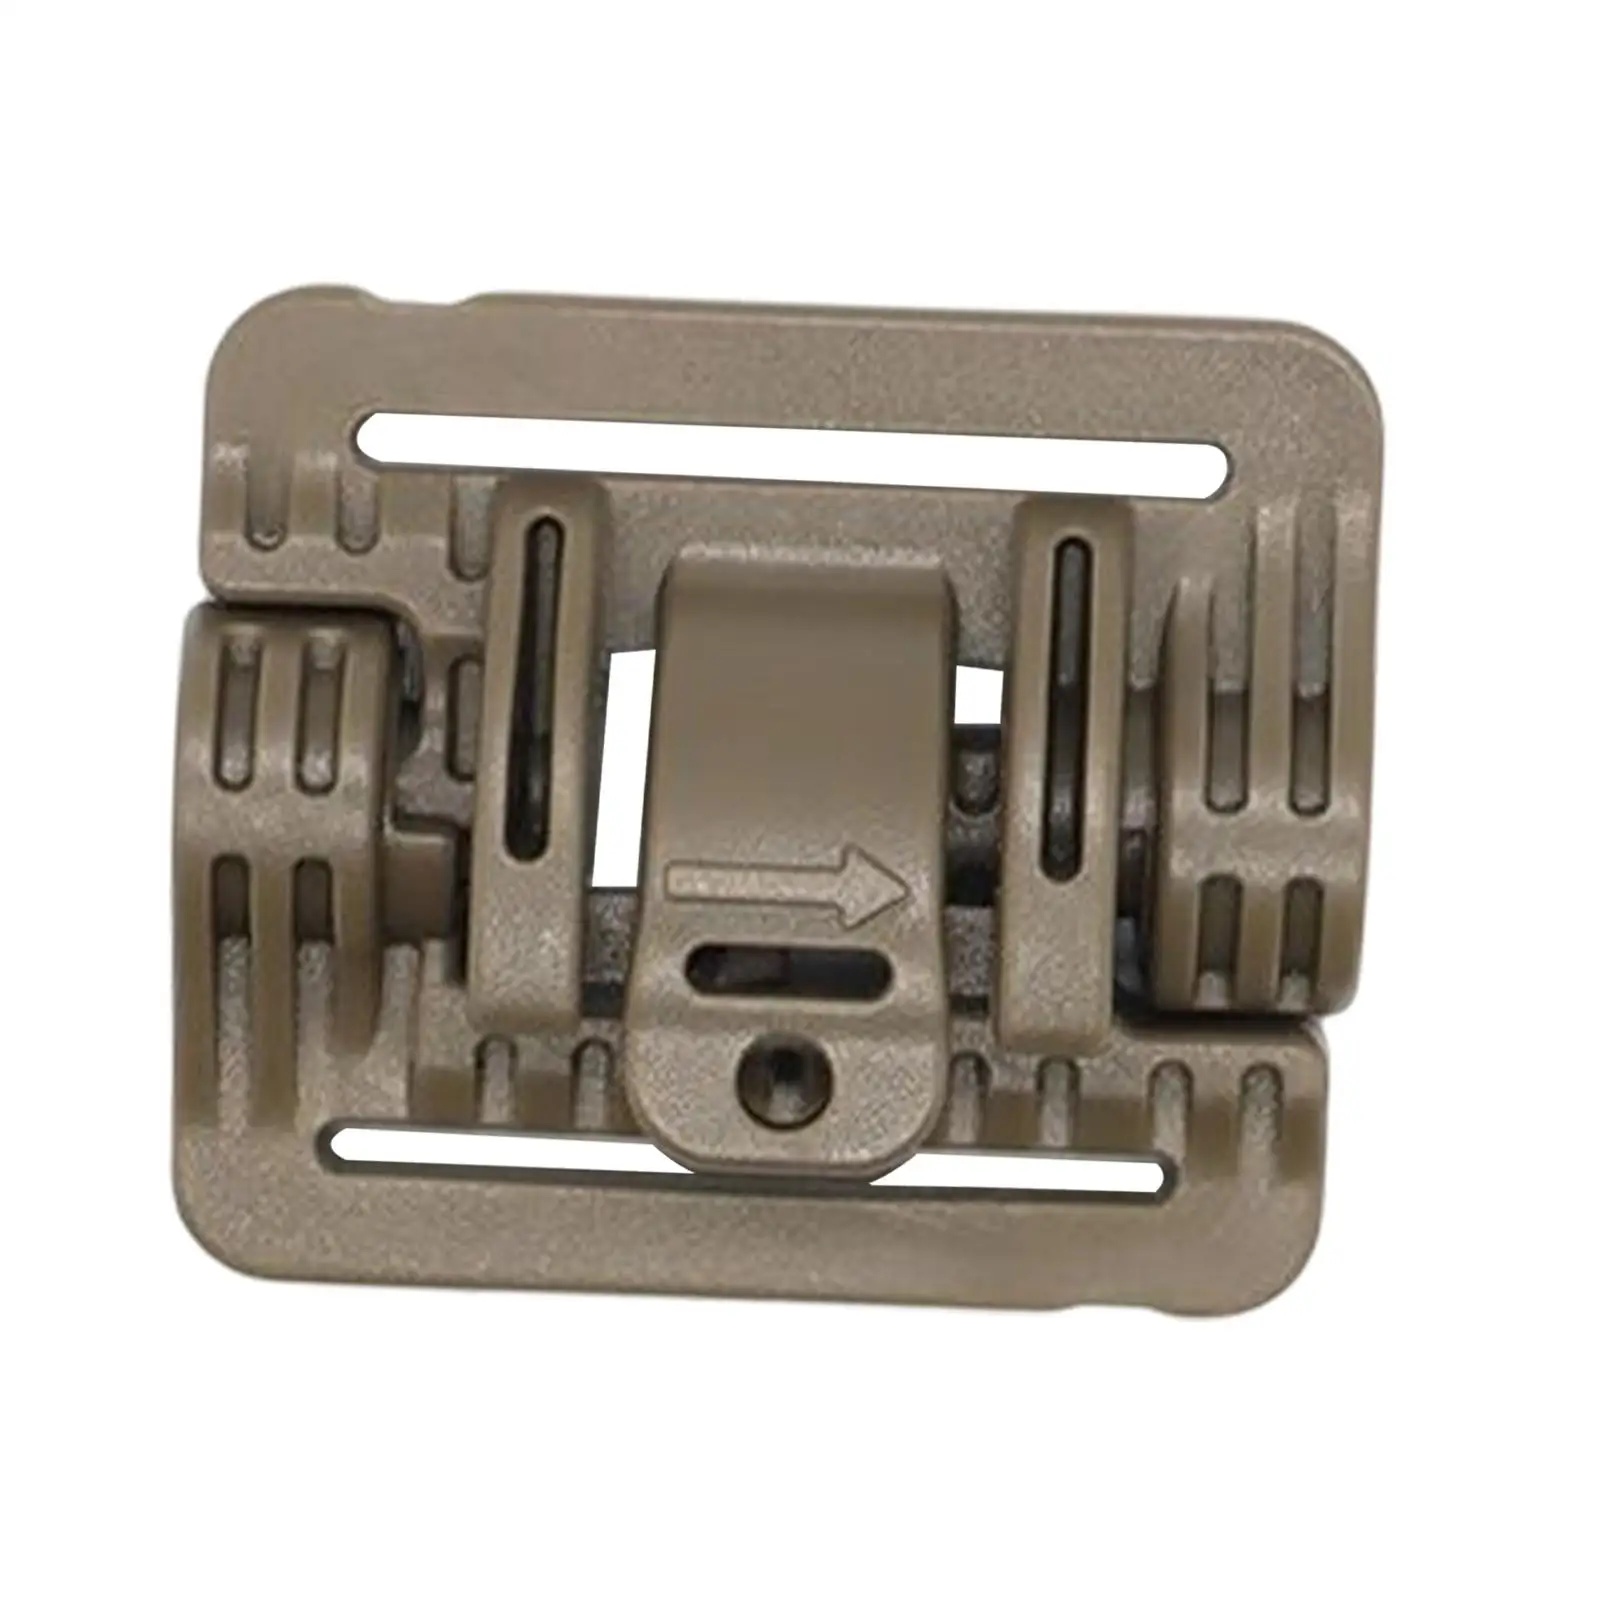 Vest Quick Release Buckle Removal Buckle for 1.5 inch Strap Rapidly Open Connector Quick Disconnect for Plate Carrier Outdoor